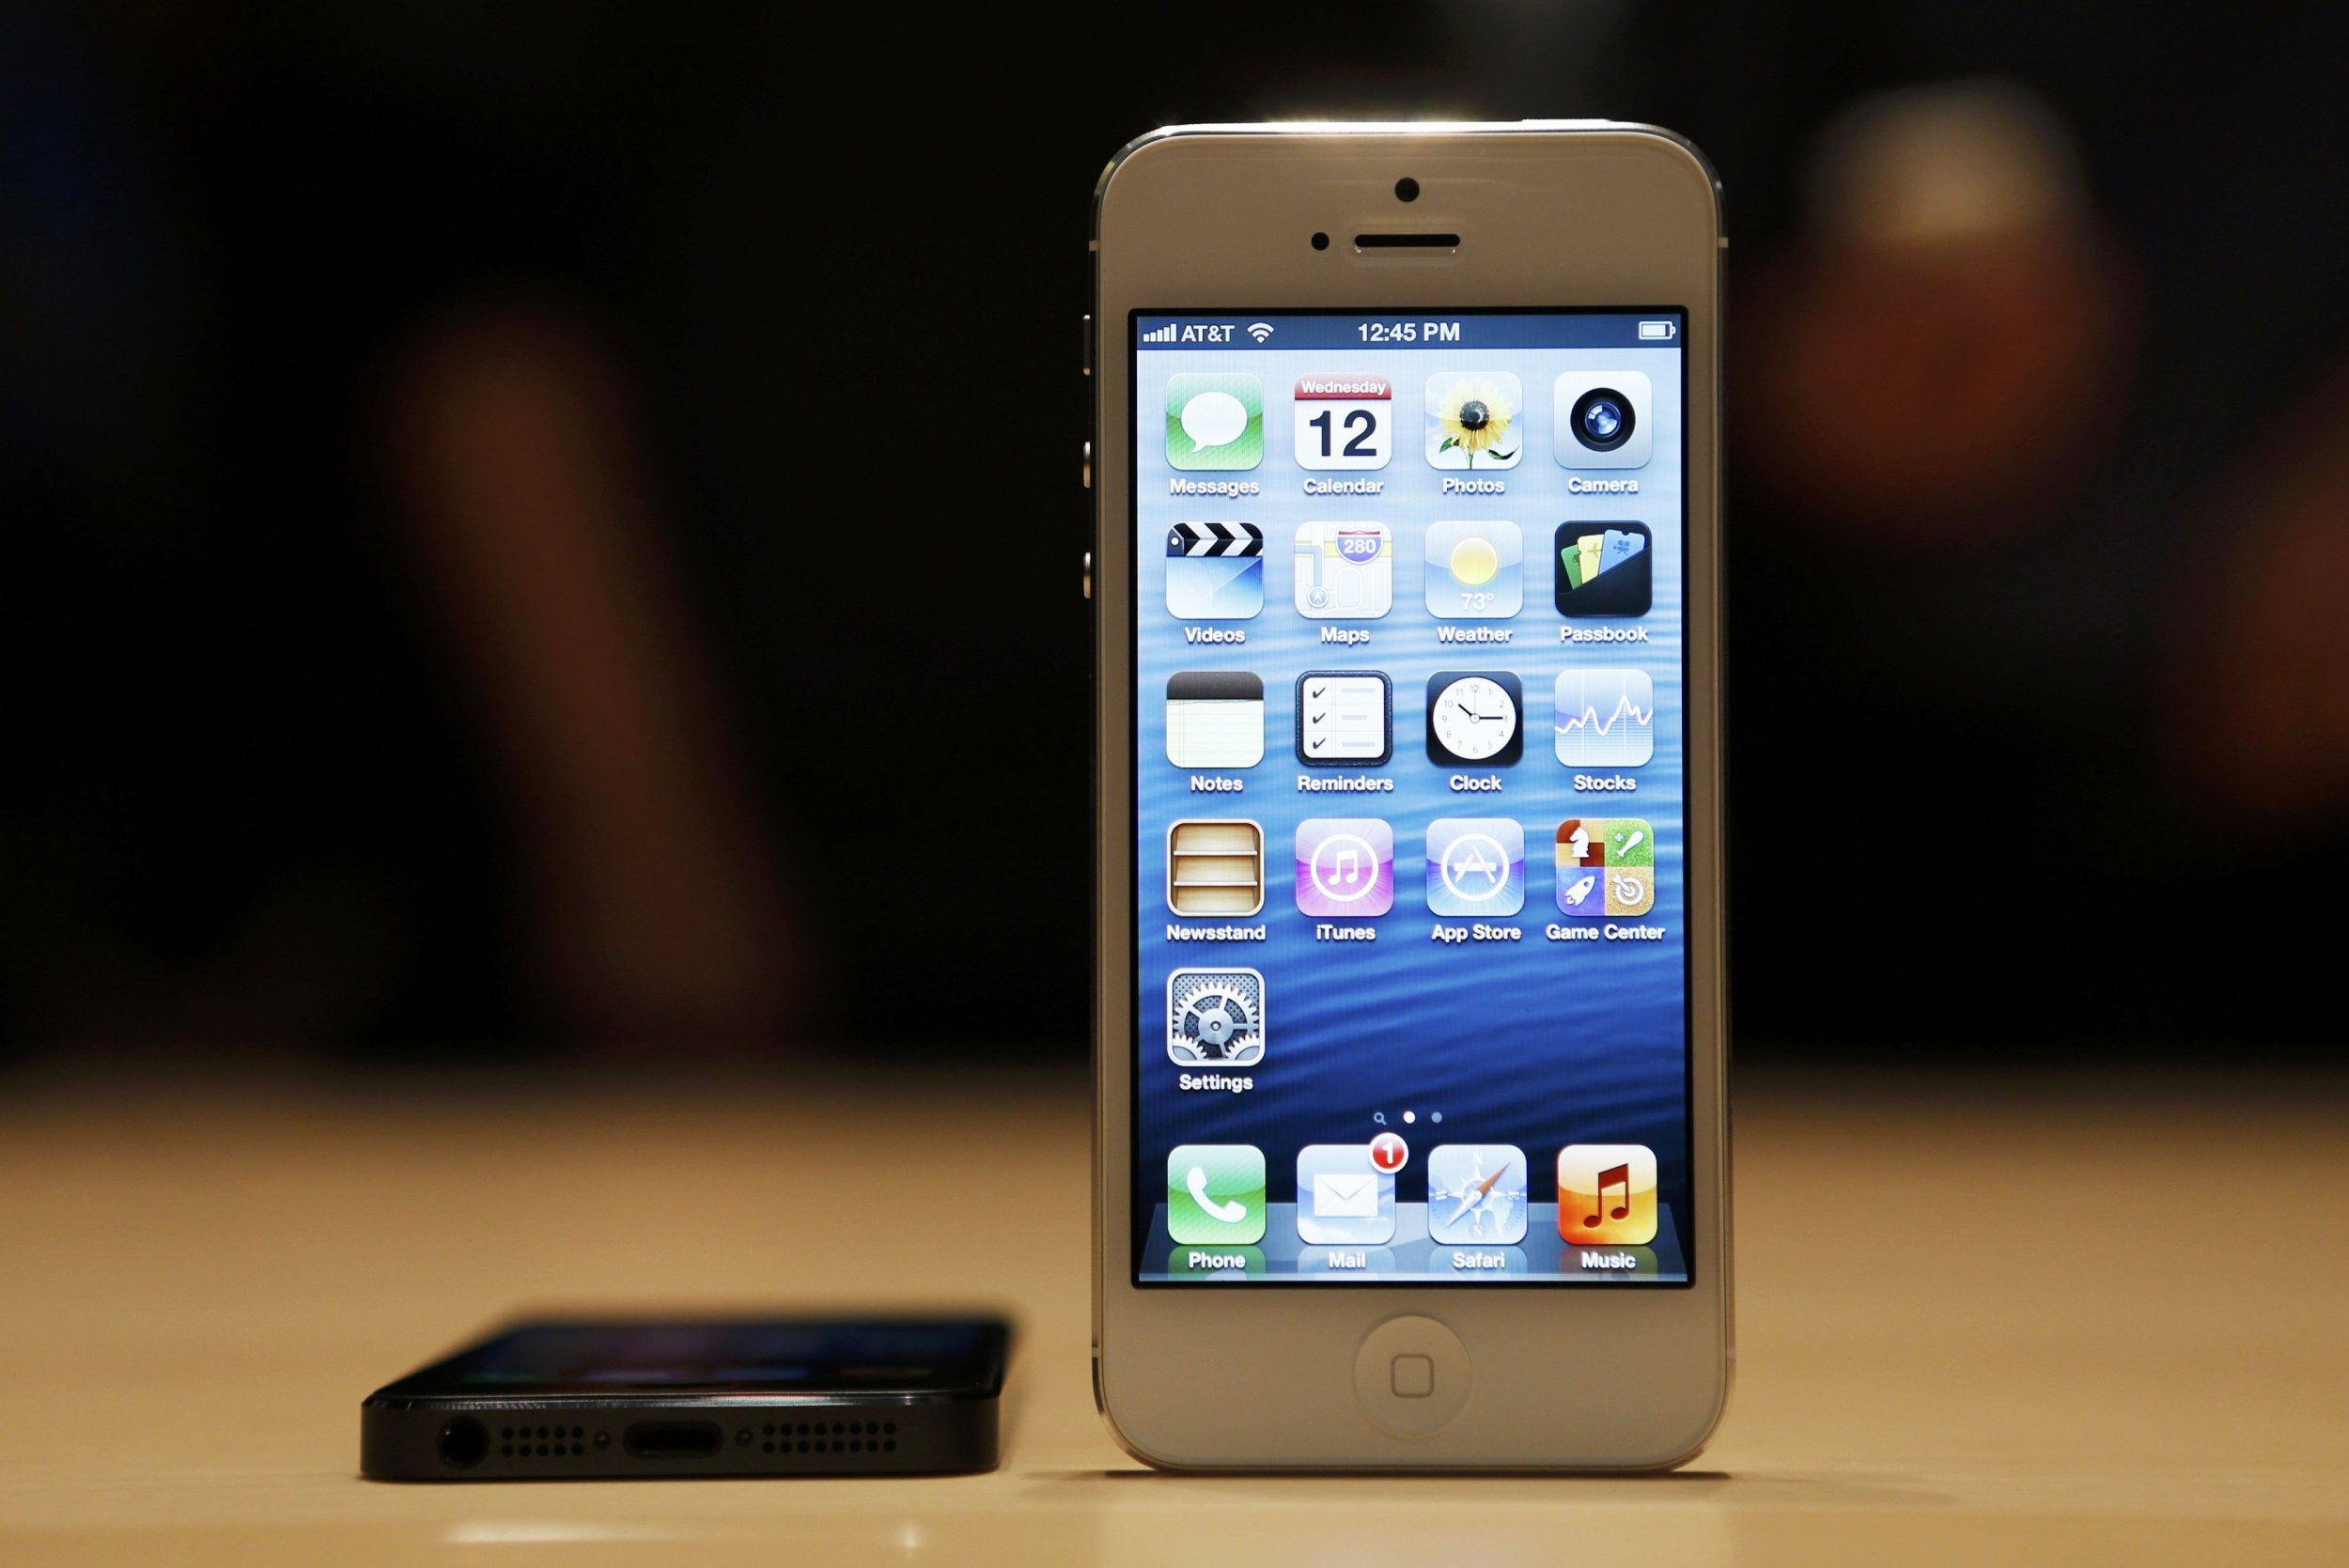 Apple Iphone 5s Rumors Analyst Says Production To Start This Month Release Date Likely In Late